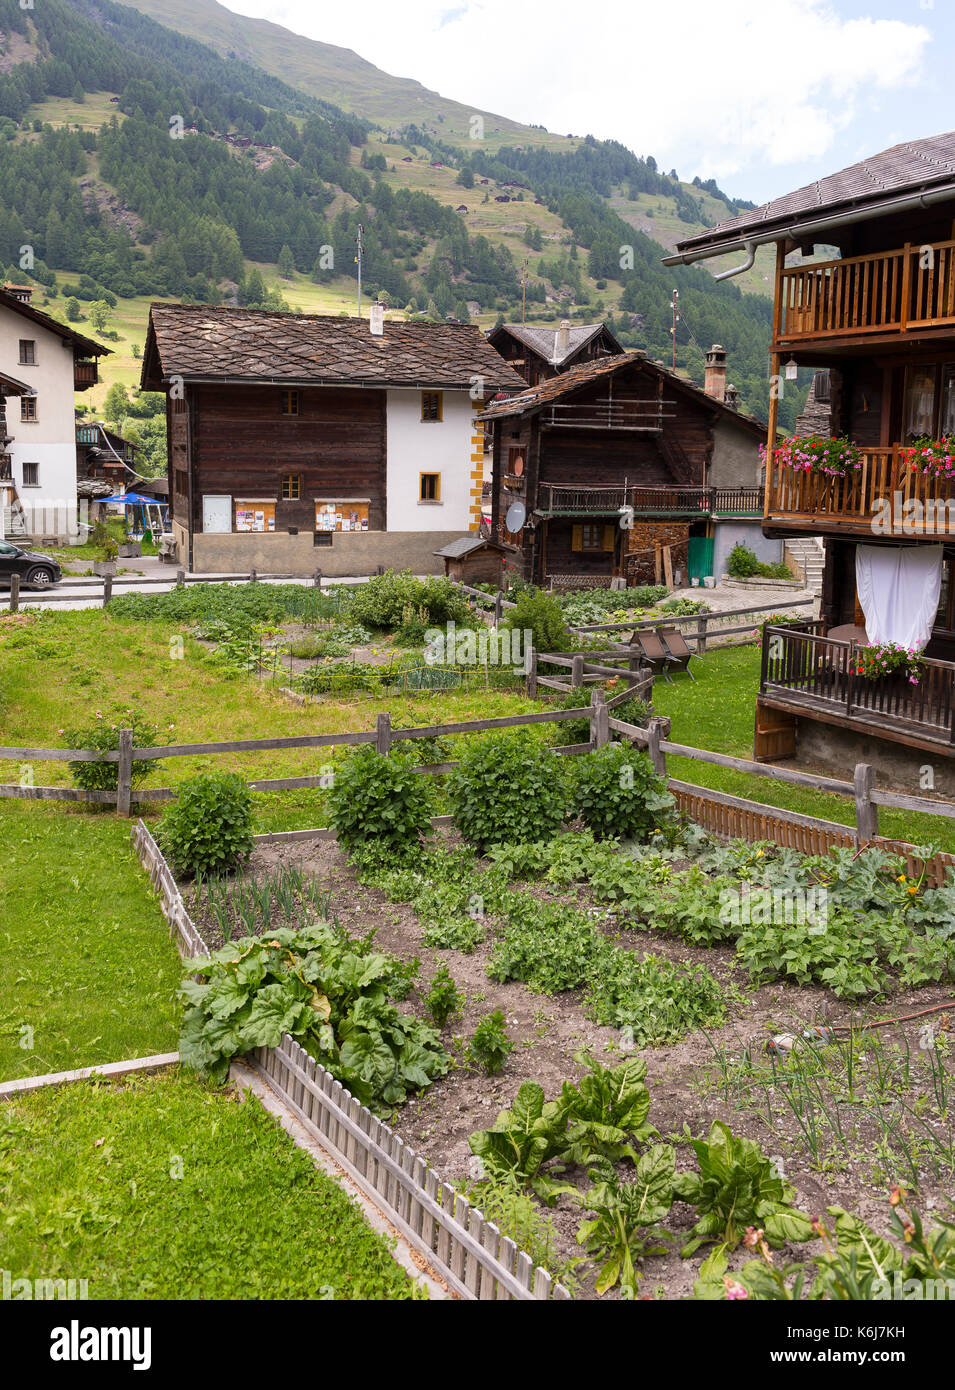 LES HAUDERES, SWITZERLAND - Garden and traditional houses, in the Pennine Alps. Stock Photo